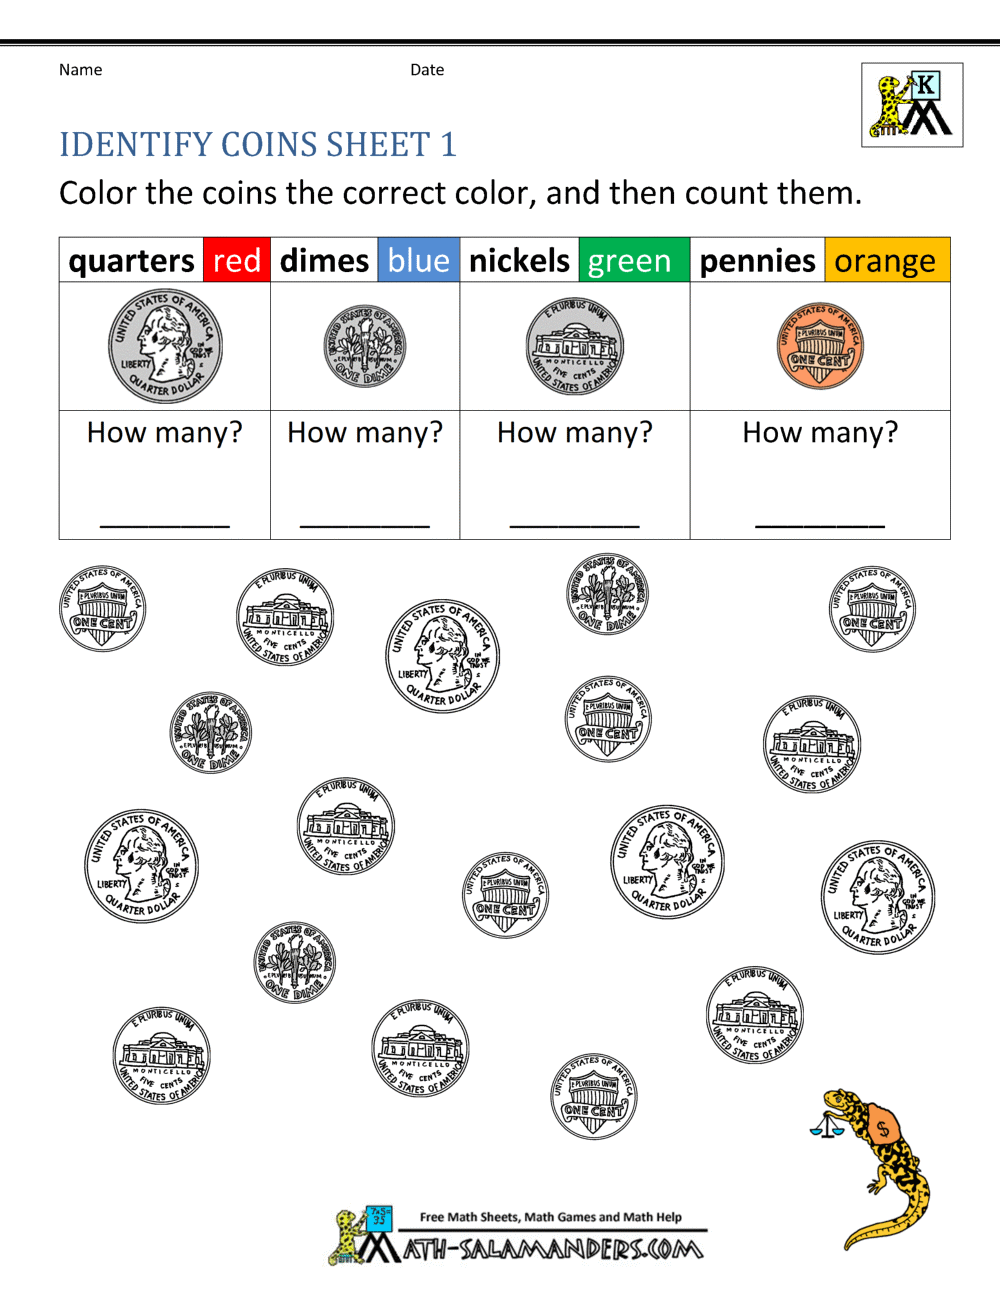 Counting and Identifying US Coins Worksheets for Kindergarten 